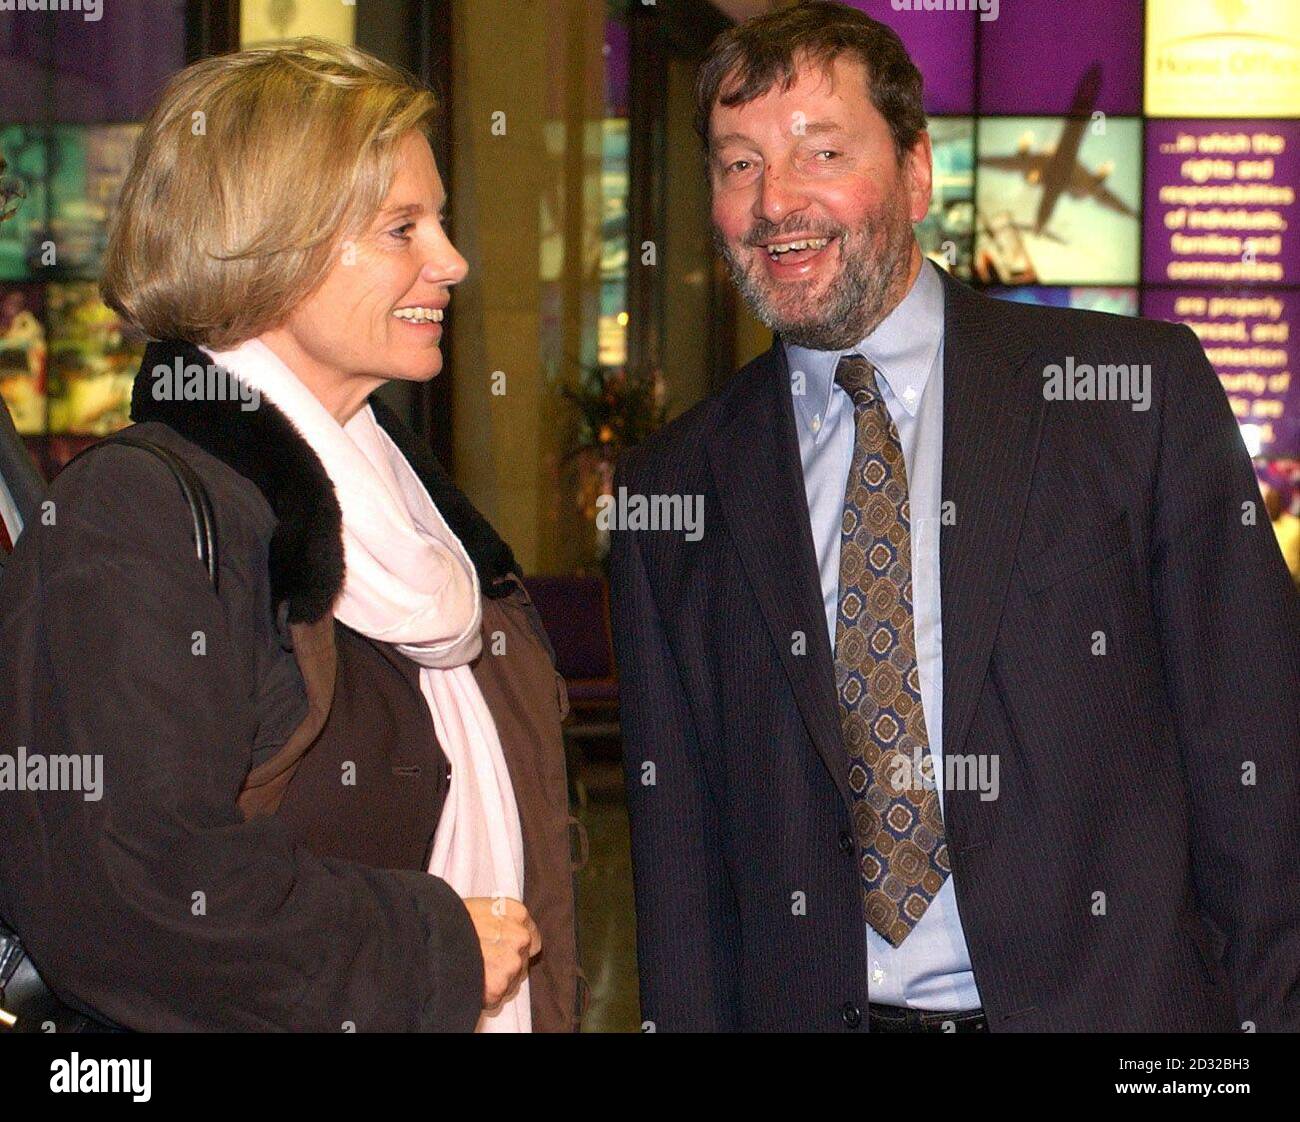 French employment minister Elisabeth Guigou is met by British Home Secretary David Blunkett at his office in London.  He was expected to voice concerns over the refugee centre at Sangatte, near Calais.   *  Mr Blunkett has urged the French to shut down the Red Cross camp, where some 1,200 refugees are housed and which is just two miles from the entrance to the Channel Tunnel, complaining that they use it as a staging post for attempts to enter Britain illegally. Ms Guigou, in contrast, has argued for more camps to be set up near Sangatte to ease overcrowding there. Stock Photo